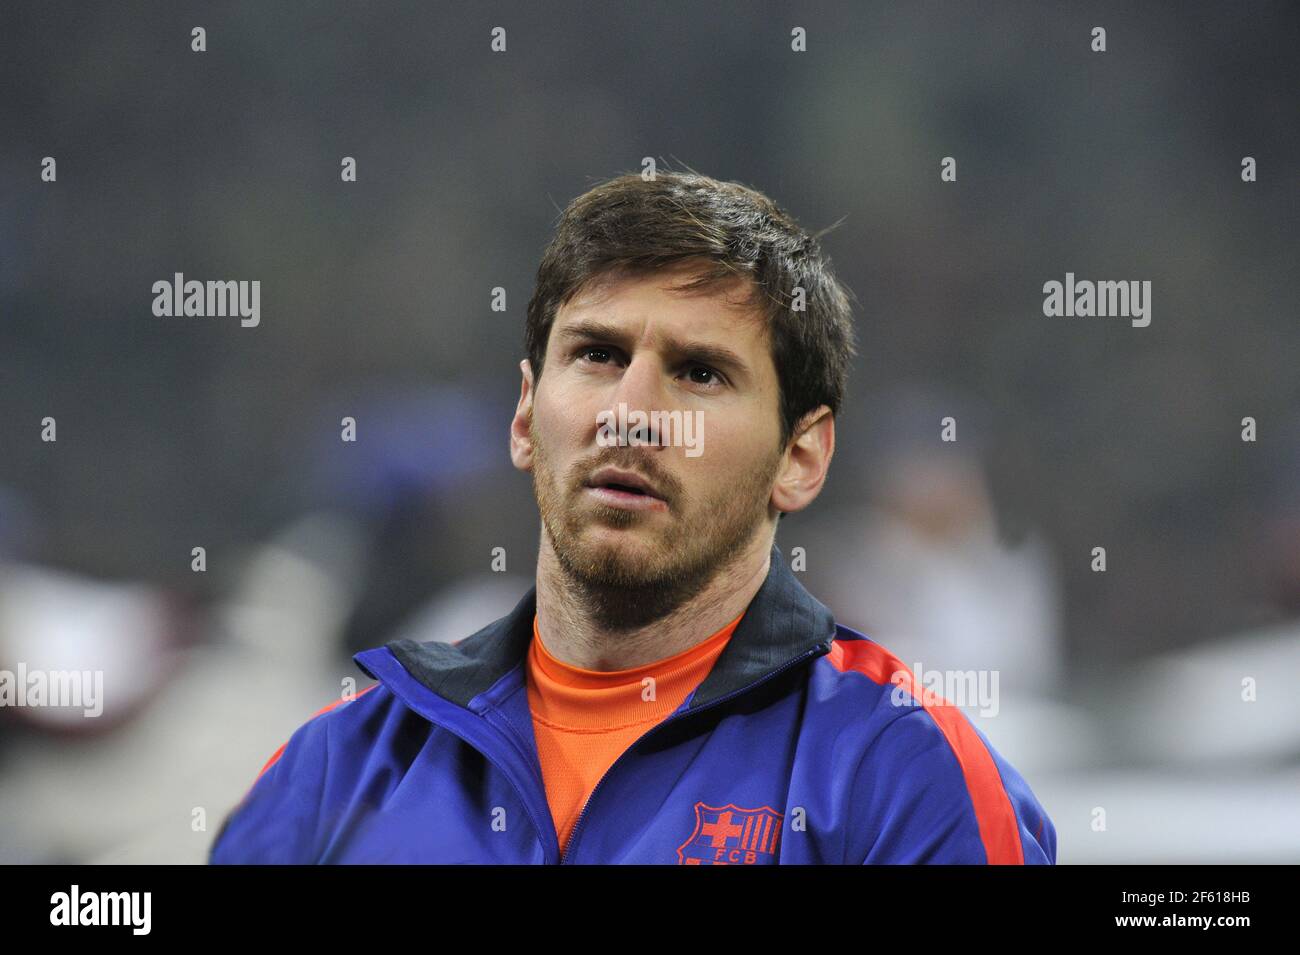 Barcelona football player Lionel Messi portrait at the San Siro soccer stadium during the UEFA Champions League match AC Milan vs FC Barcelona, in Milan Stock Photo